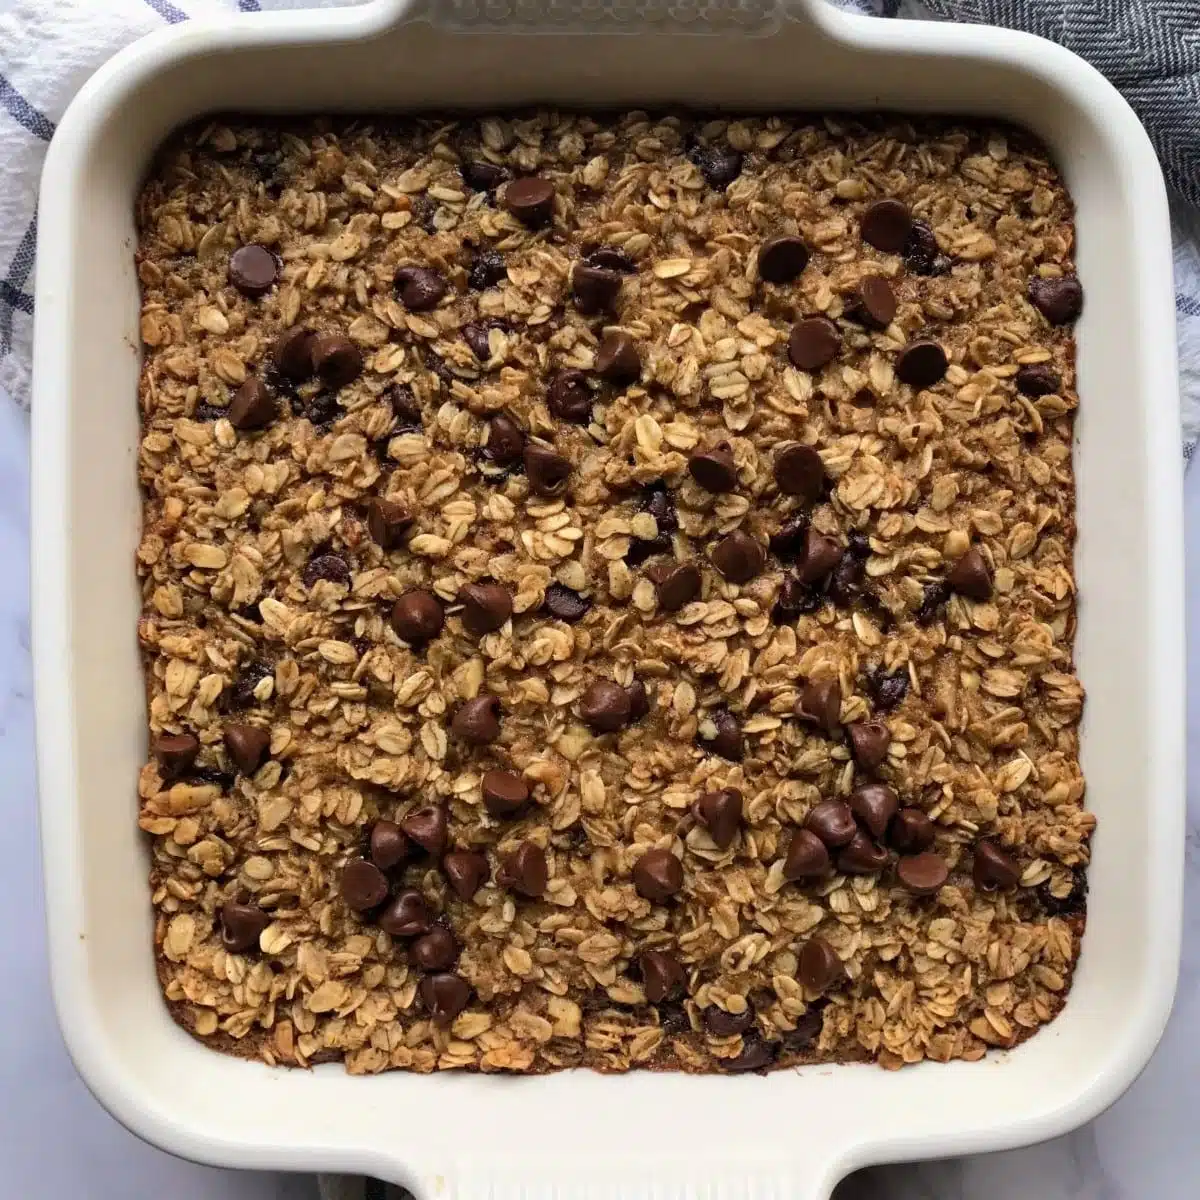 Tasty Chocolate Chip Baked Oats